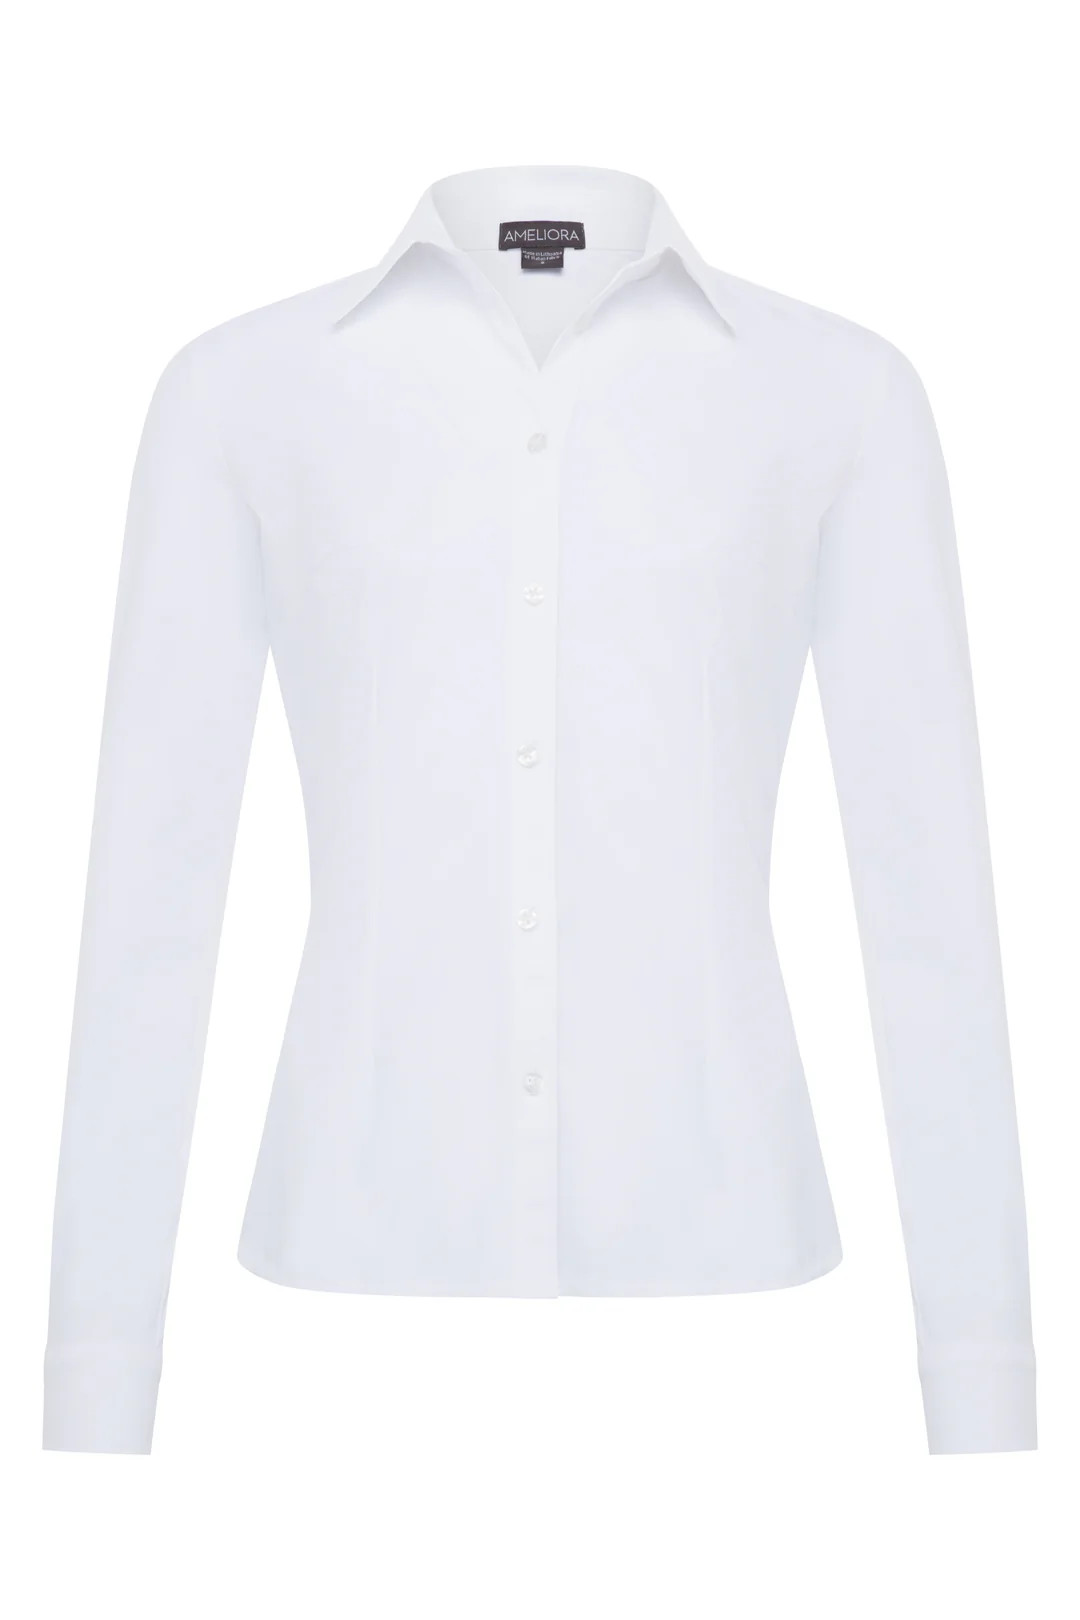 The Dawn - Fitted Button Up | Ameliora